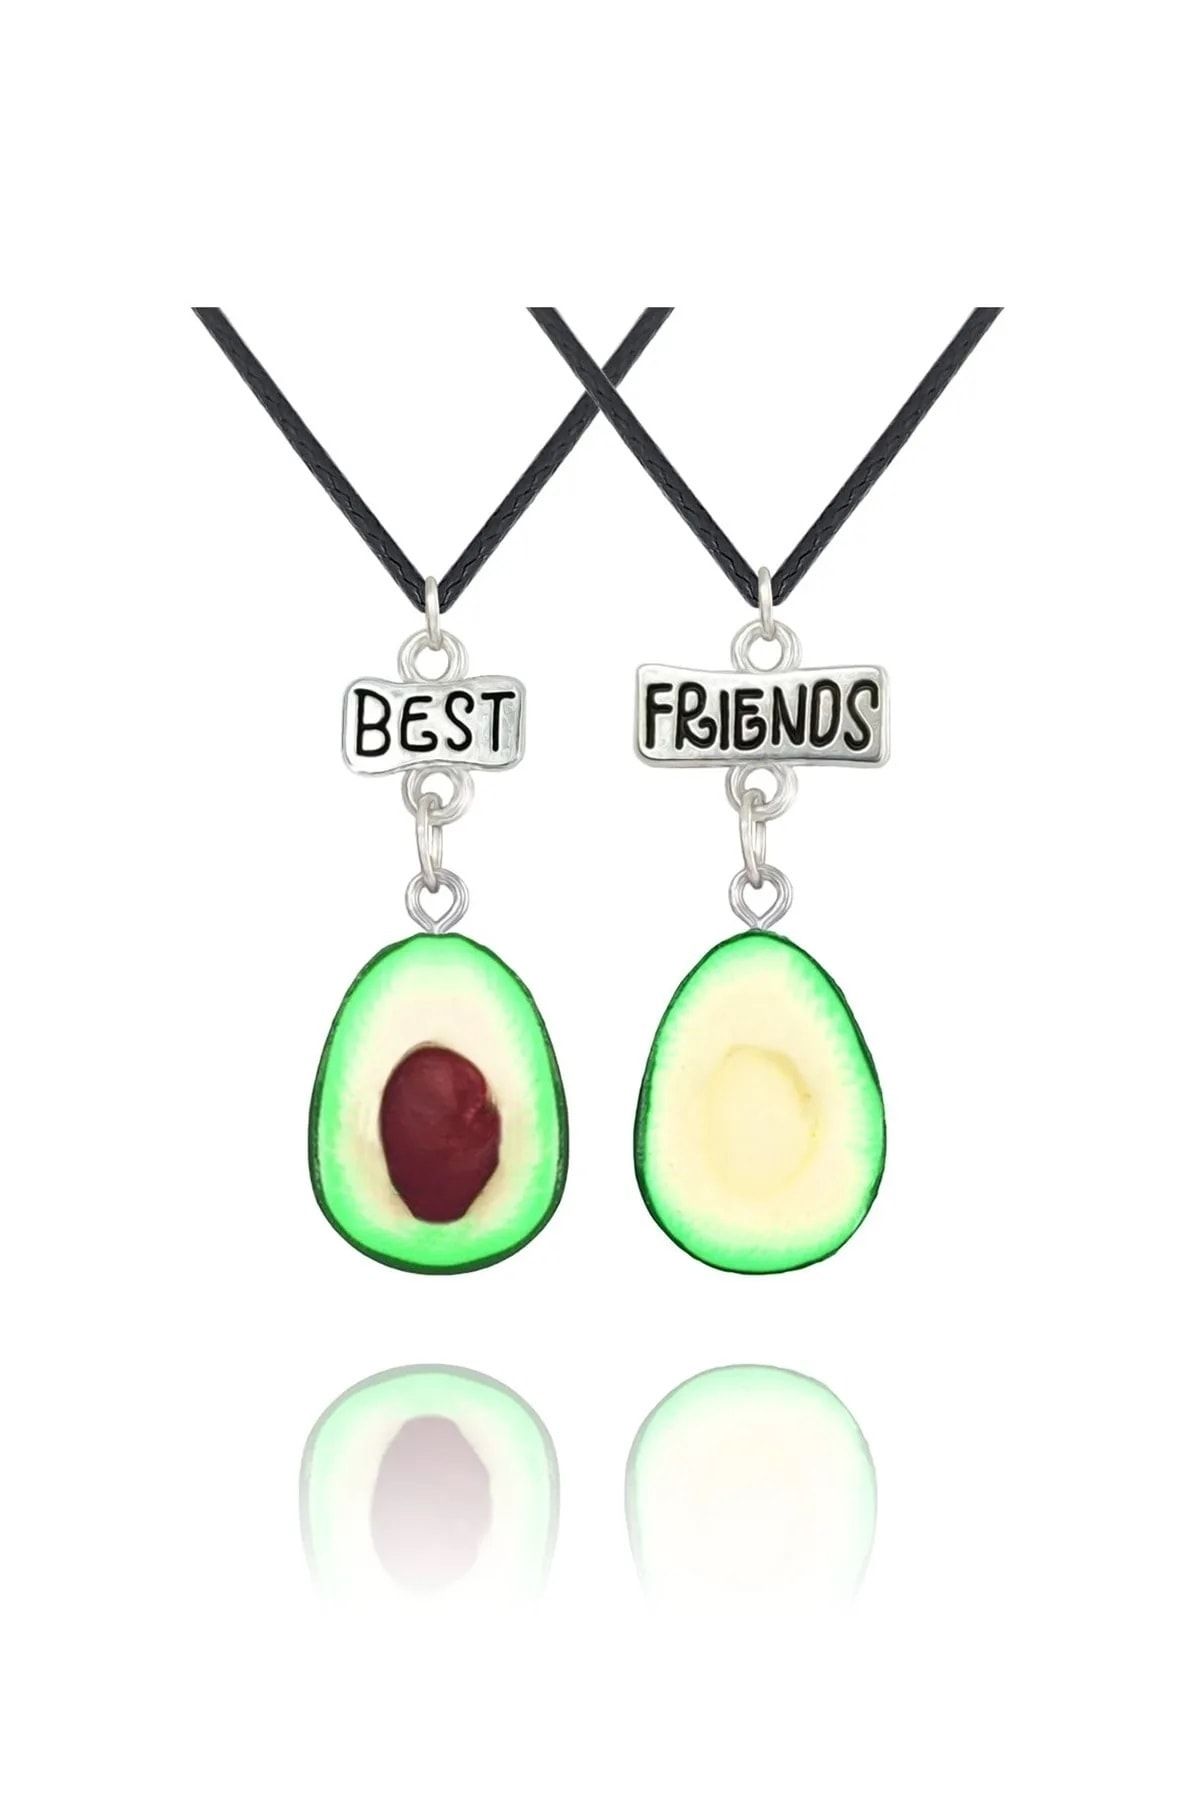 Amazon.com: Avocado Matching Necklaces, Best Friend Necklace for 2, Friendship  Necklace for Couples Lover Friends Cute Fruit BFF Necklace Jewelry Gift :  Clothing, Shoes & Jewelry